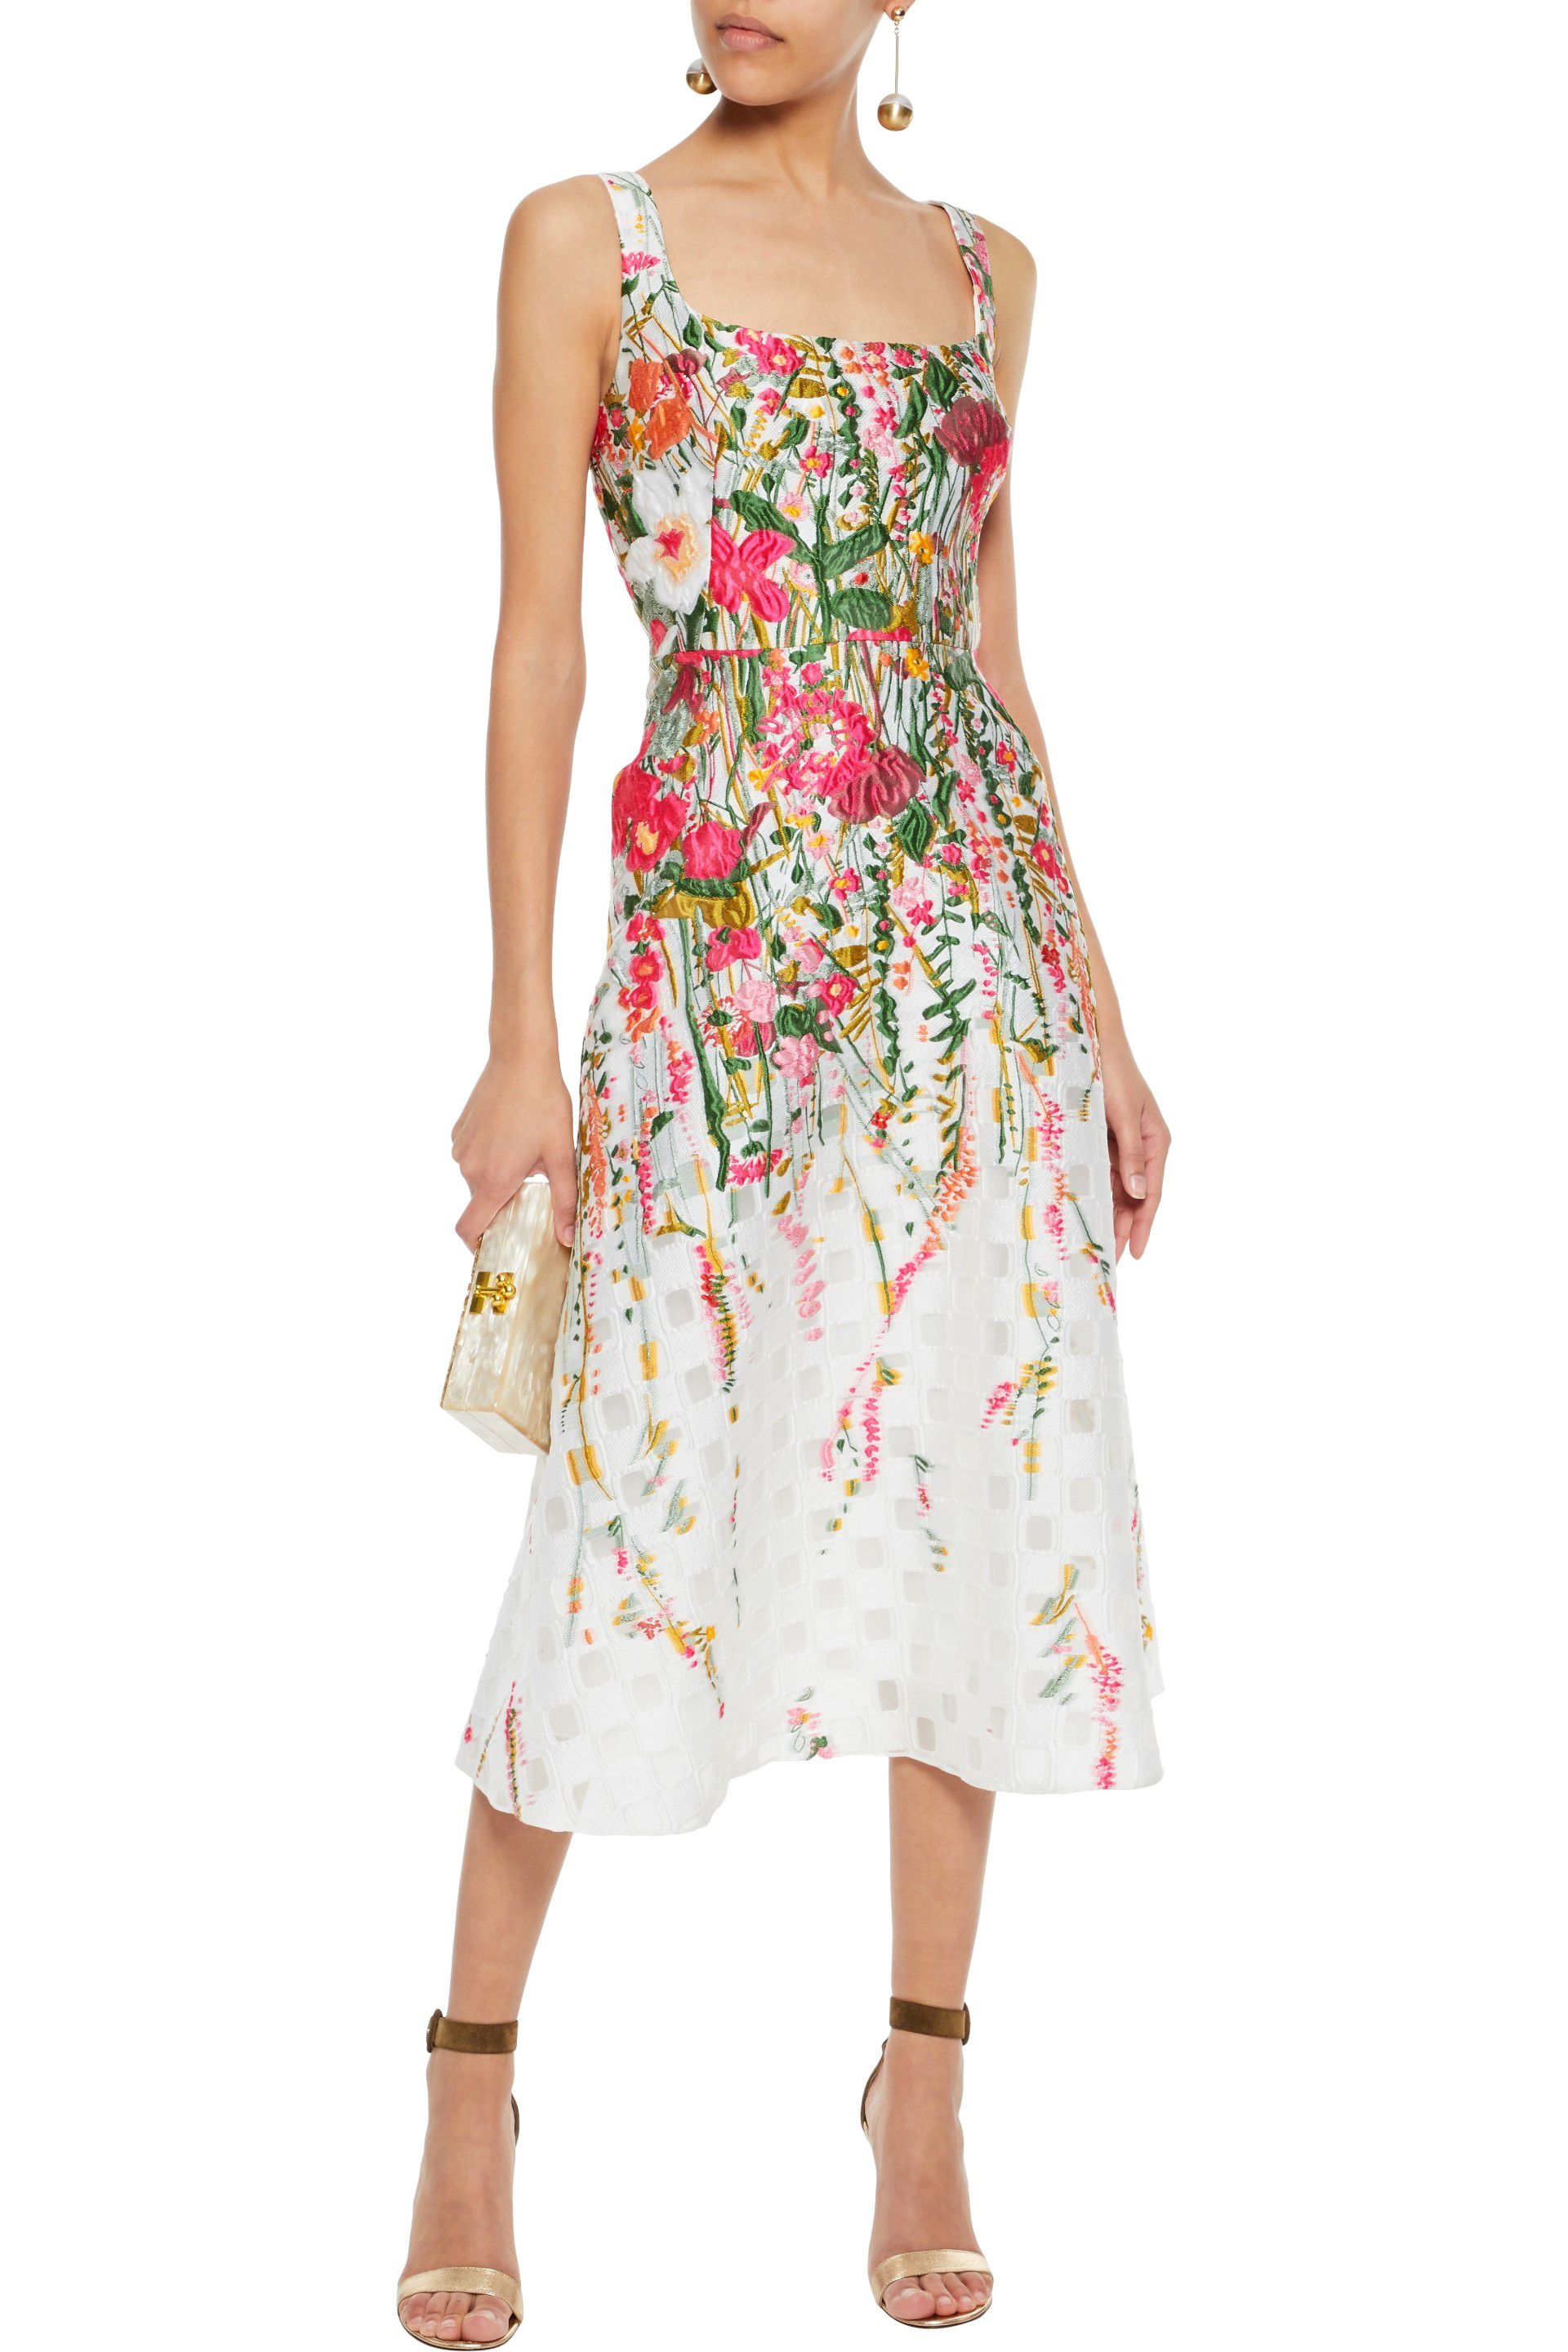 Romantic Designer Dresses | Sale Up To 70% Off At THE OUTNET